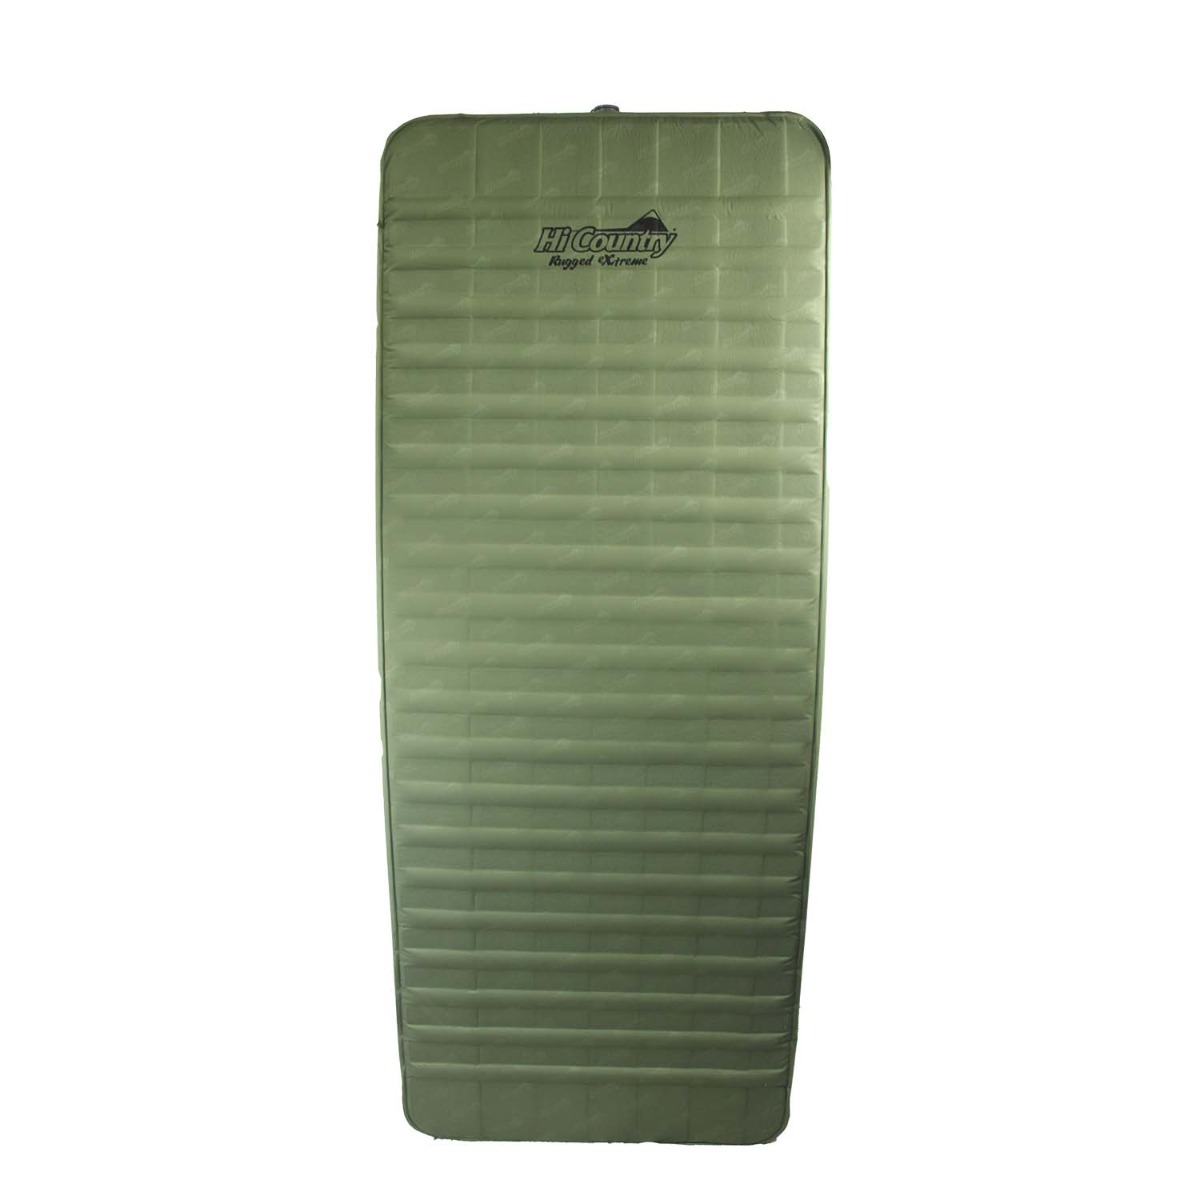 HI-COUNTRY RUGGED EXTREME 4WD MAT SINGLE